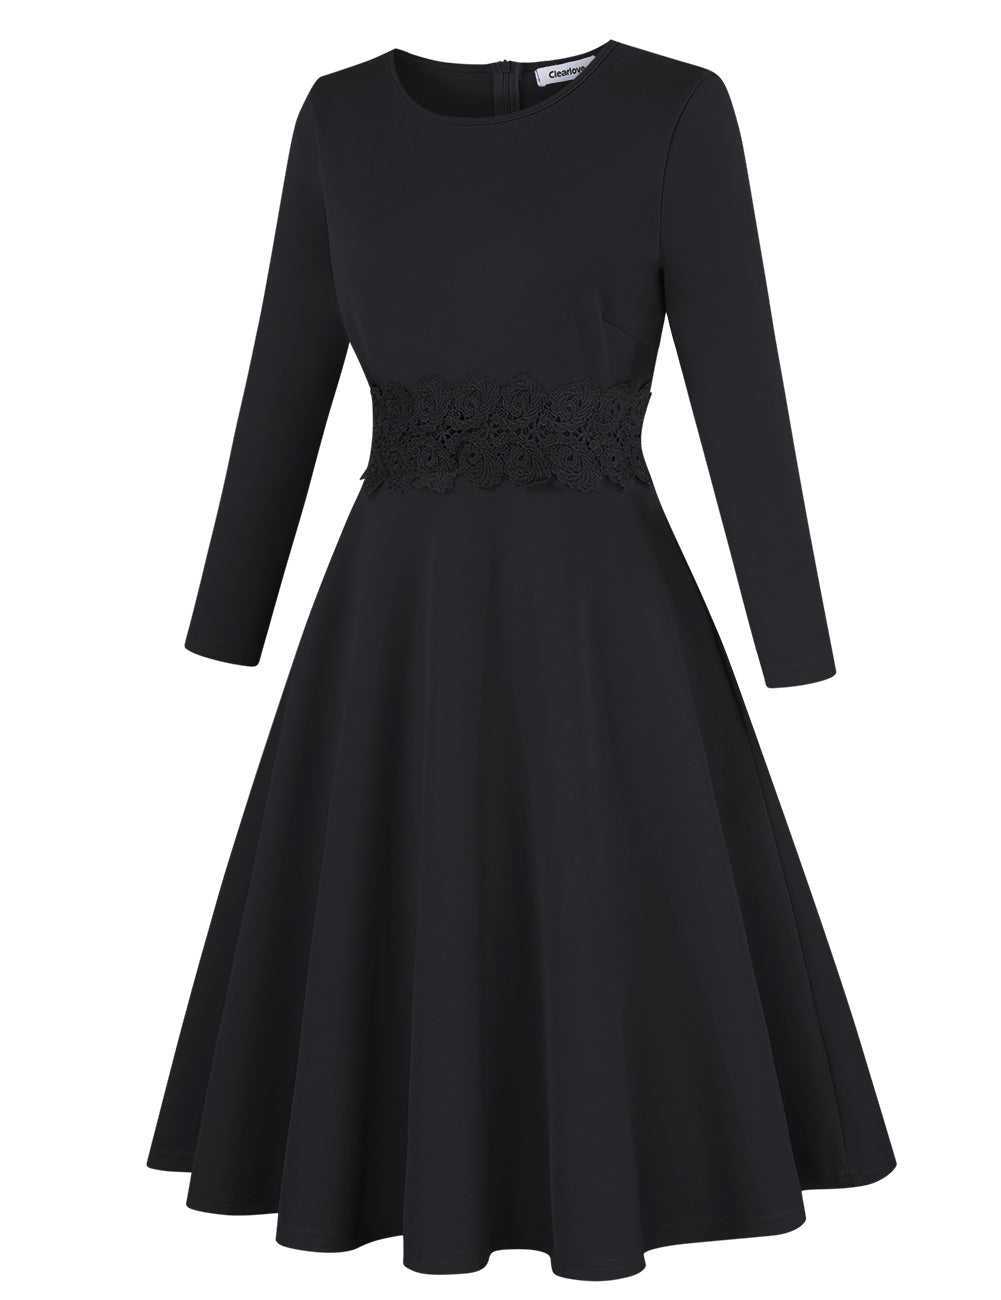 CLEARLOVE Ladies Cocktail Embroidered A-Line Dress Black